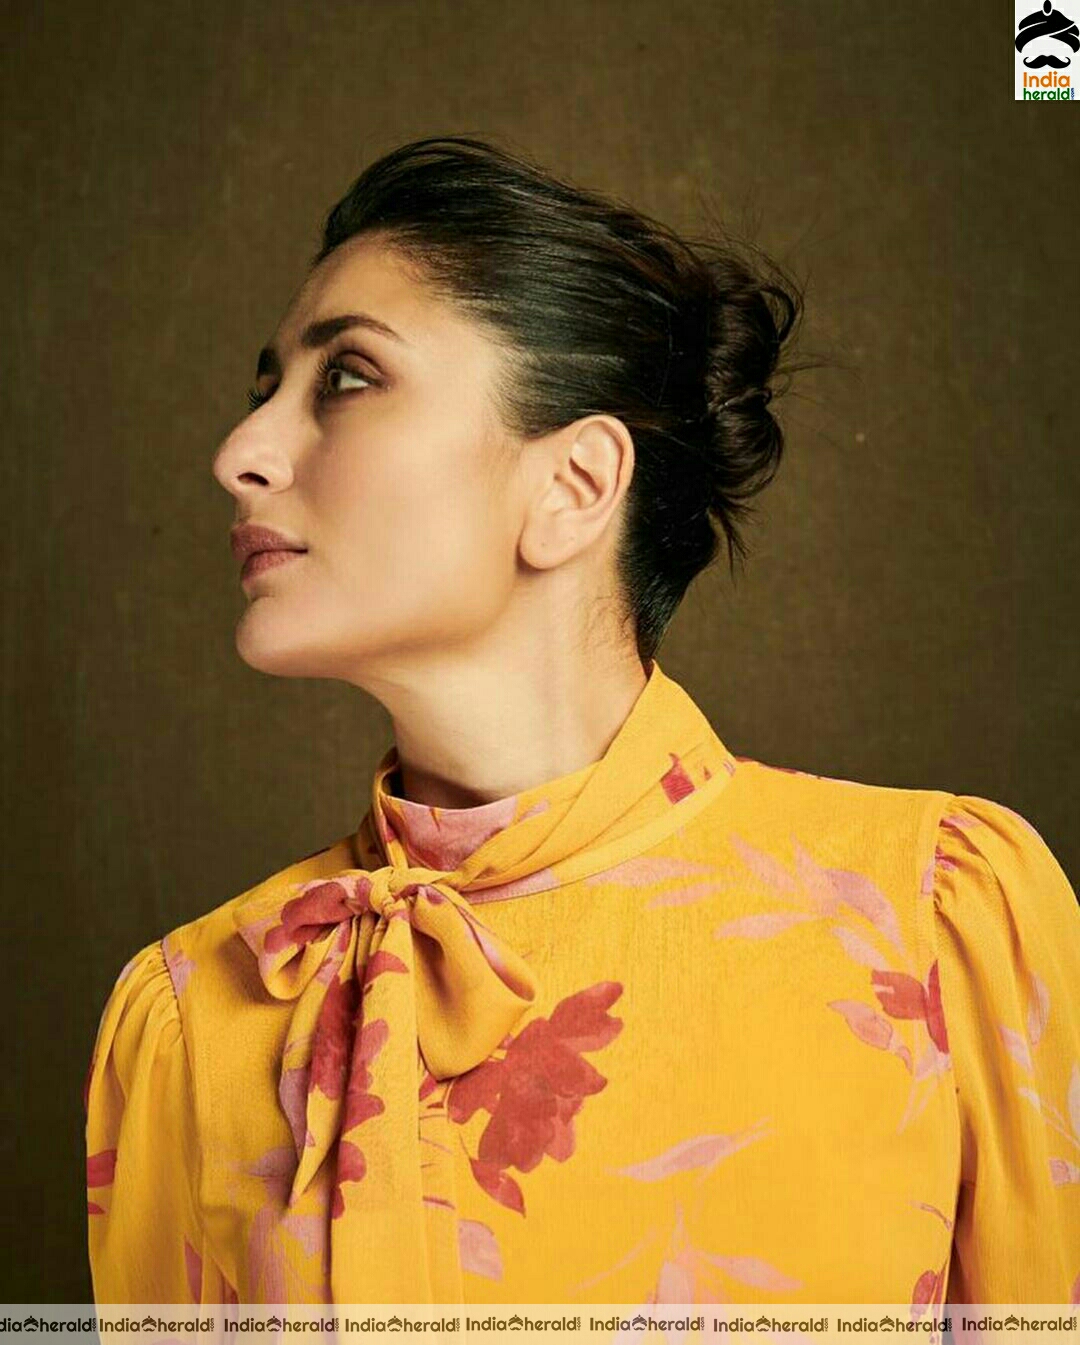 Kareena Kapoor looking pretty in yellow without ear ring